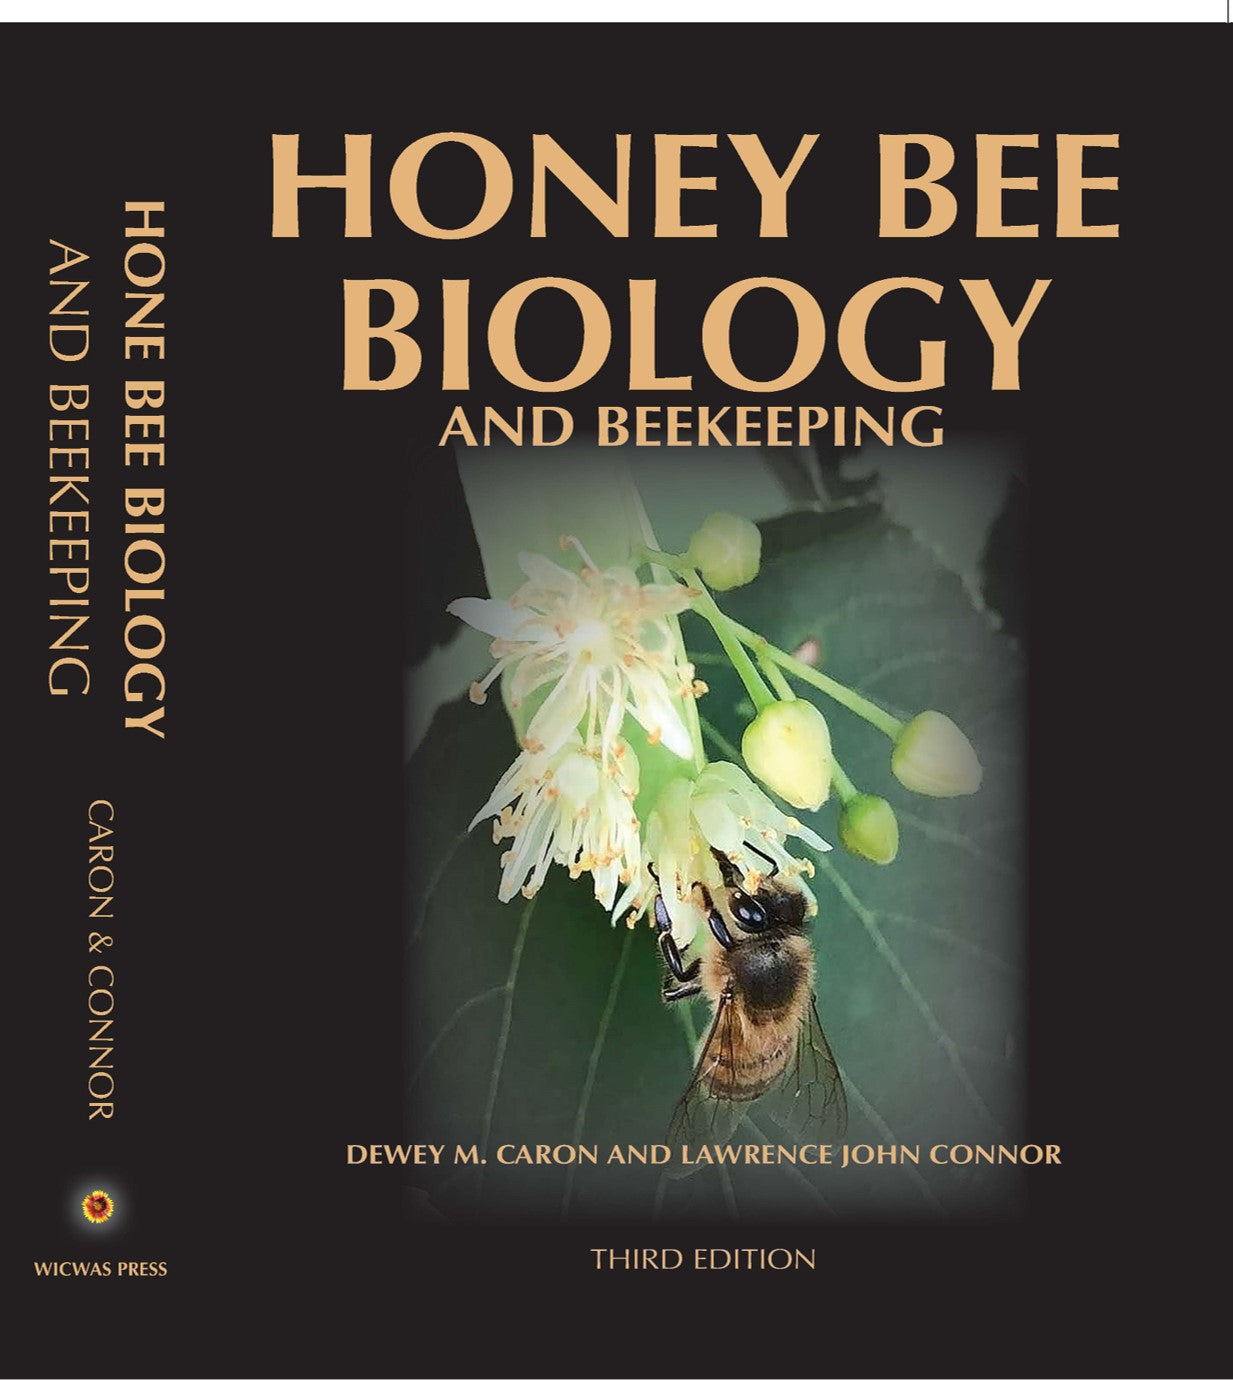 Honey Bee Biology and Beekeeping (Third Edition) by Dewey Caron and Larry Conner